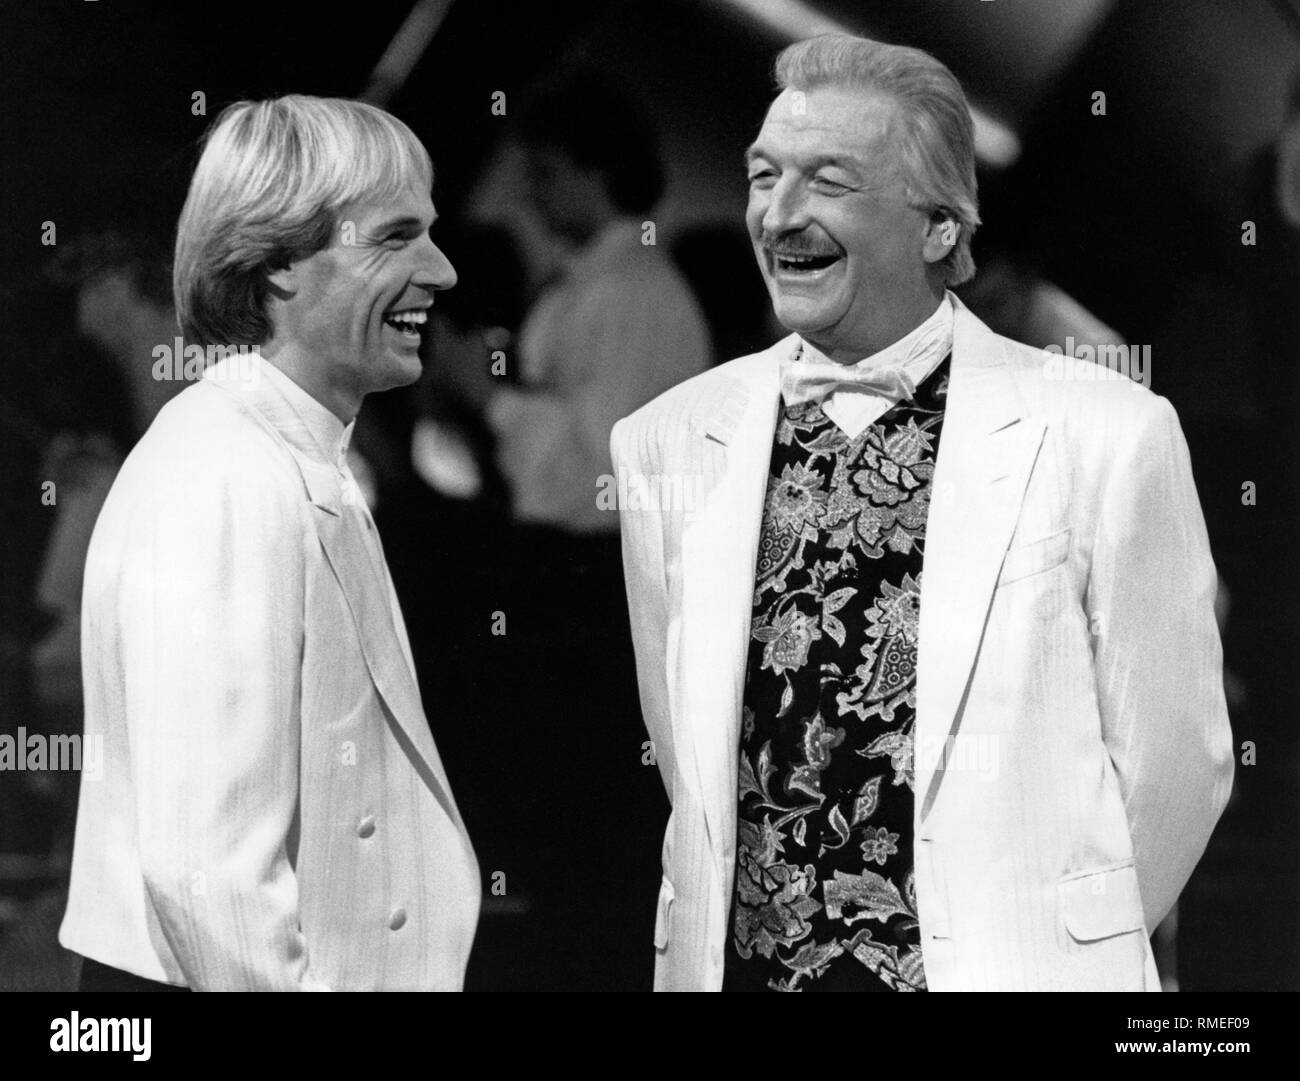 The musician James Last (Hans Last) together with the French pianist Richard Clayderman (l.) at the TV show ARD-Wunschkonzert. Stock Photo